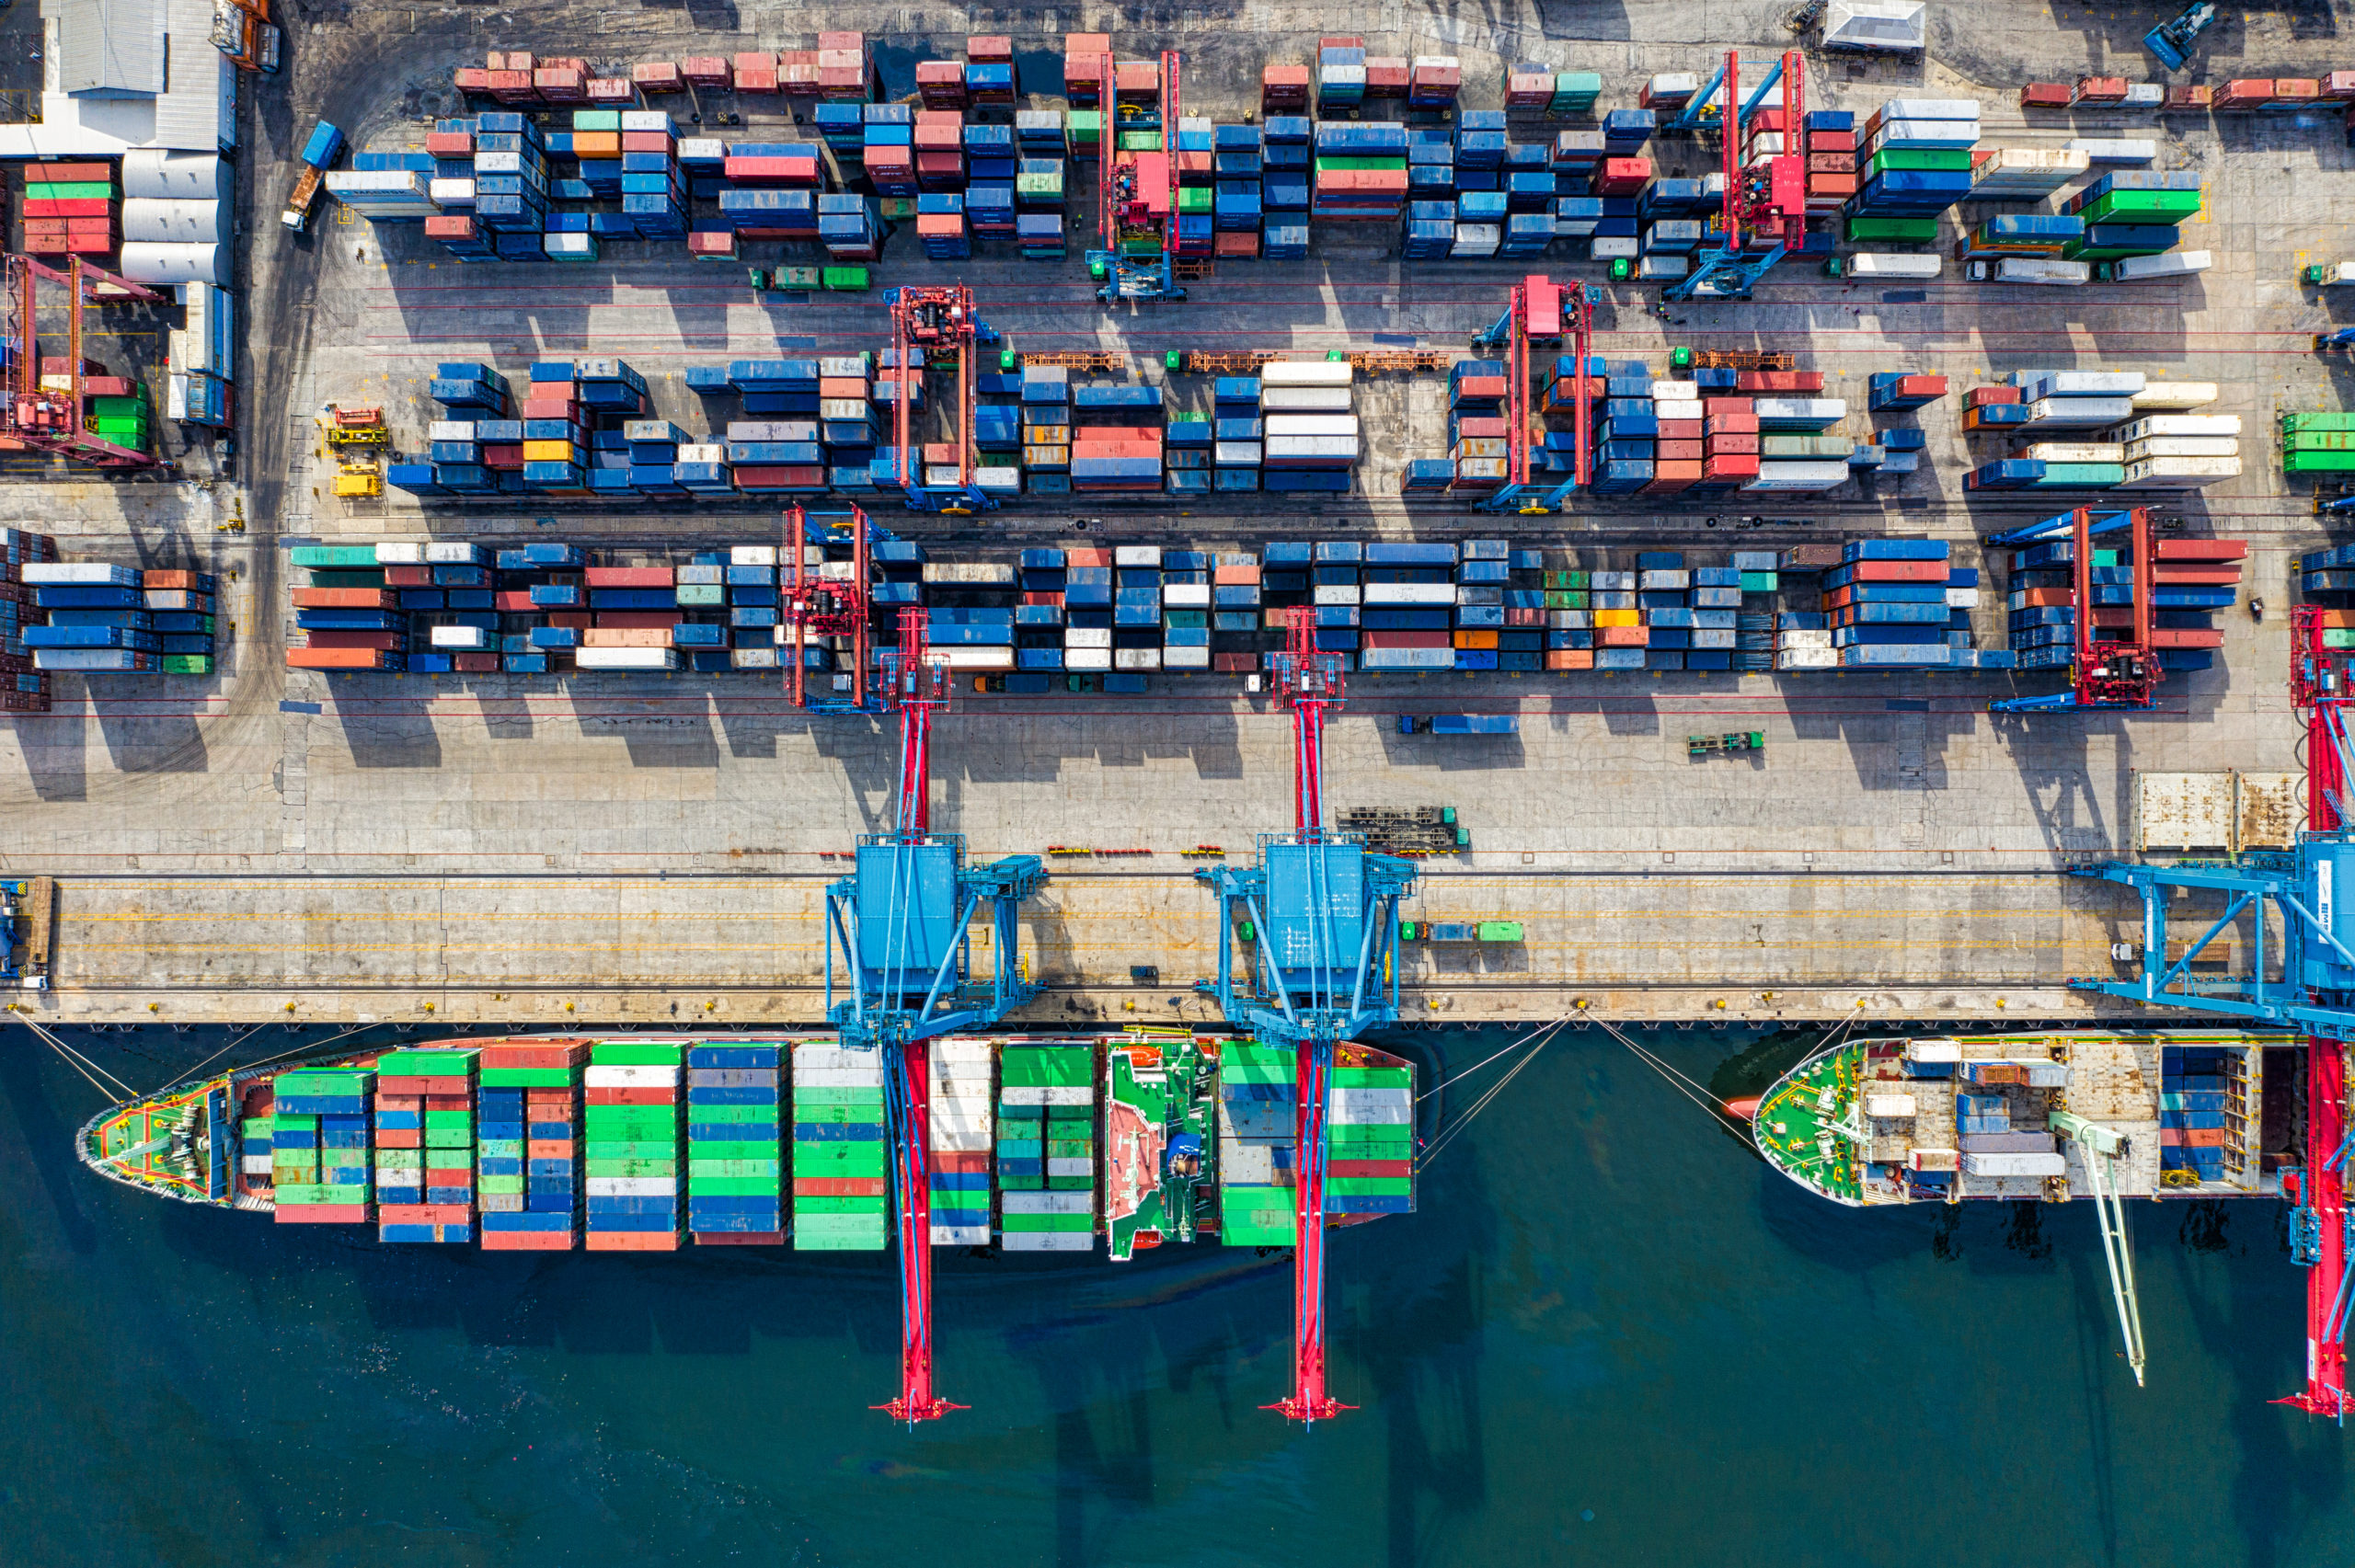 Birds eye view of freight containers